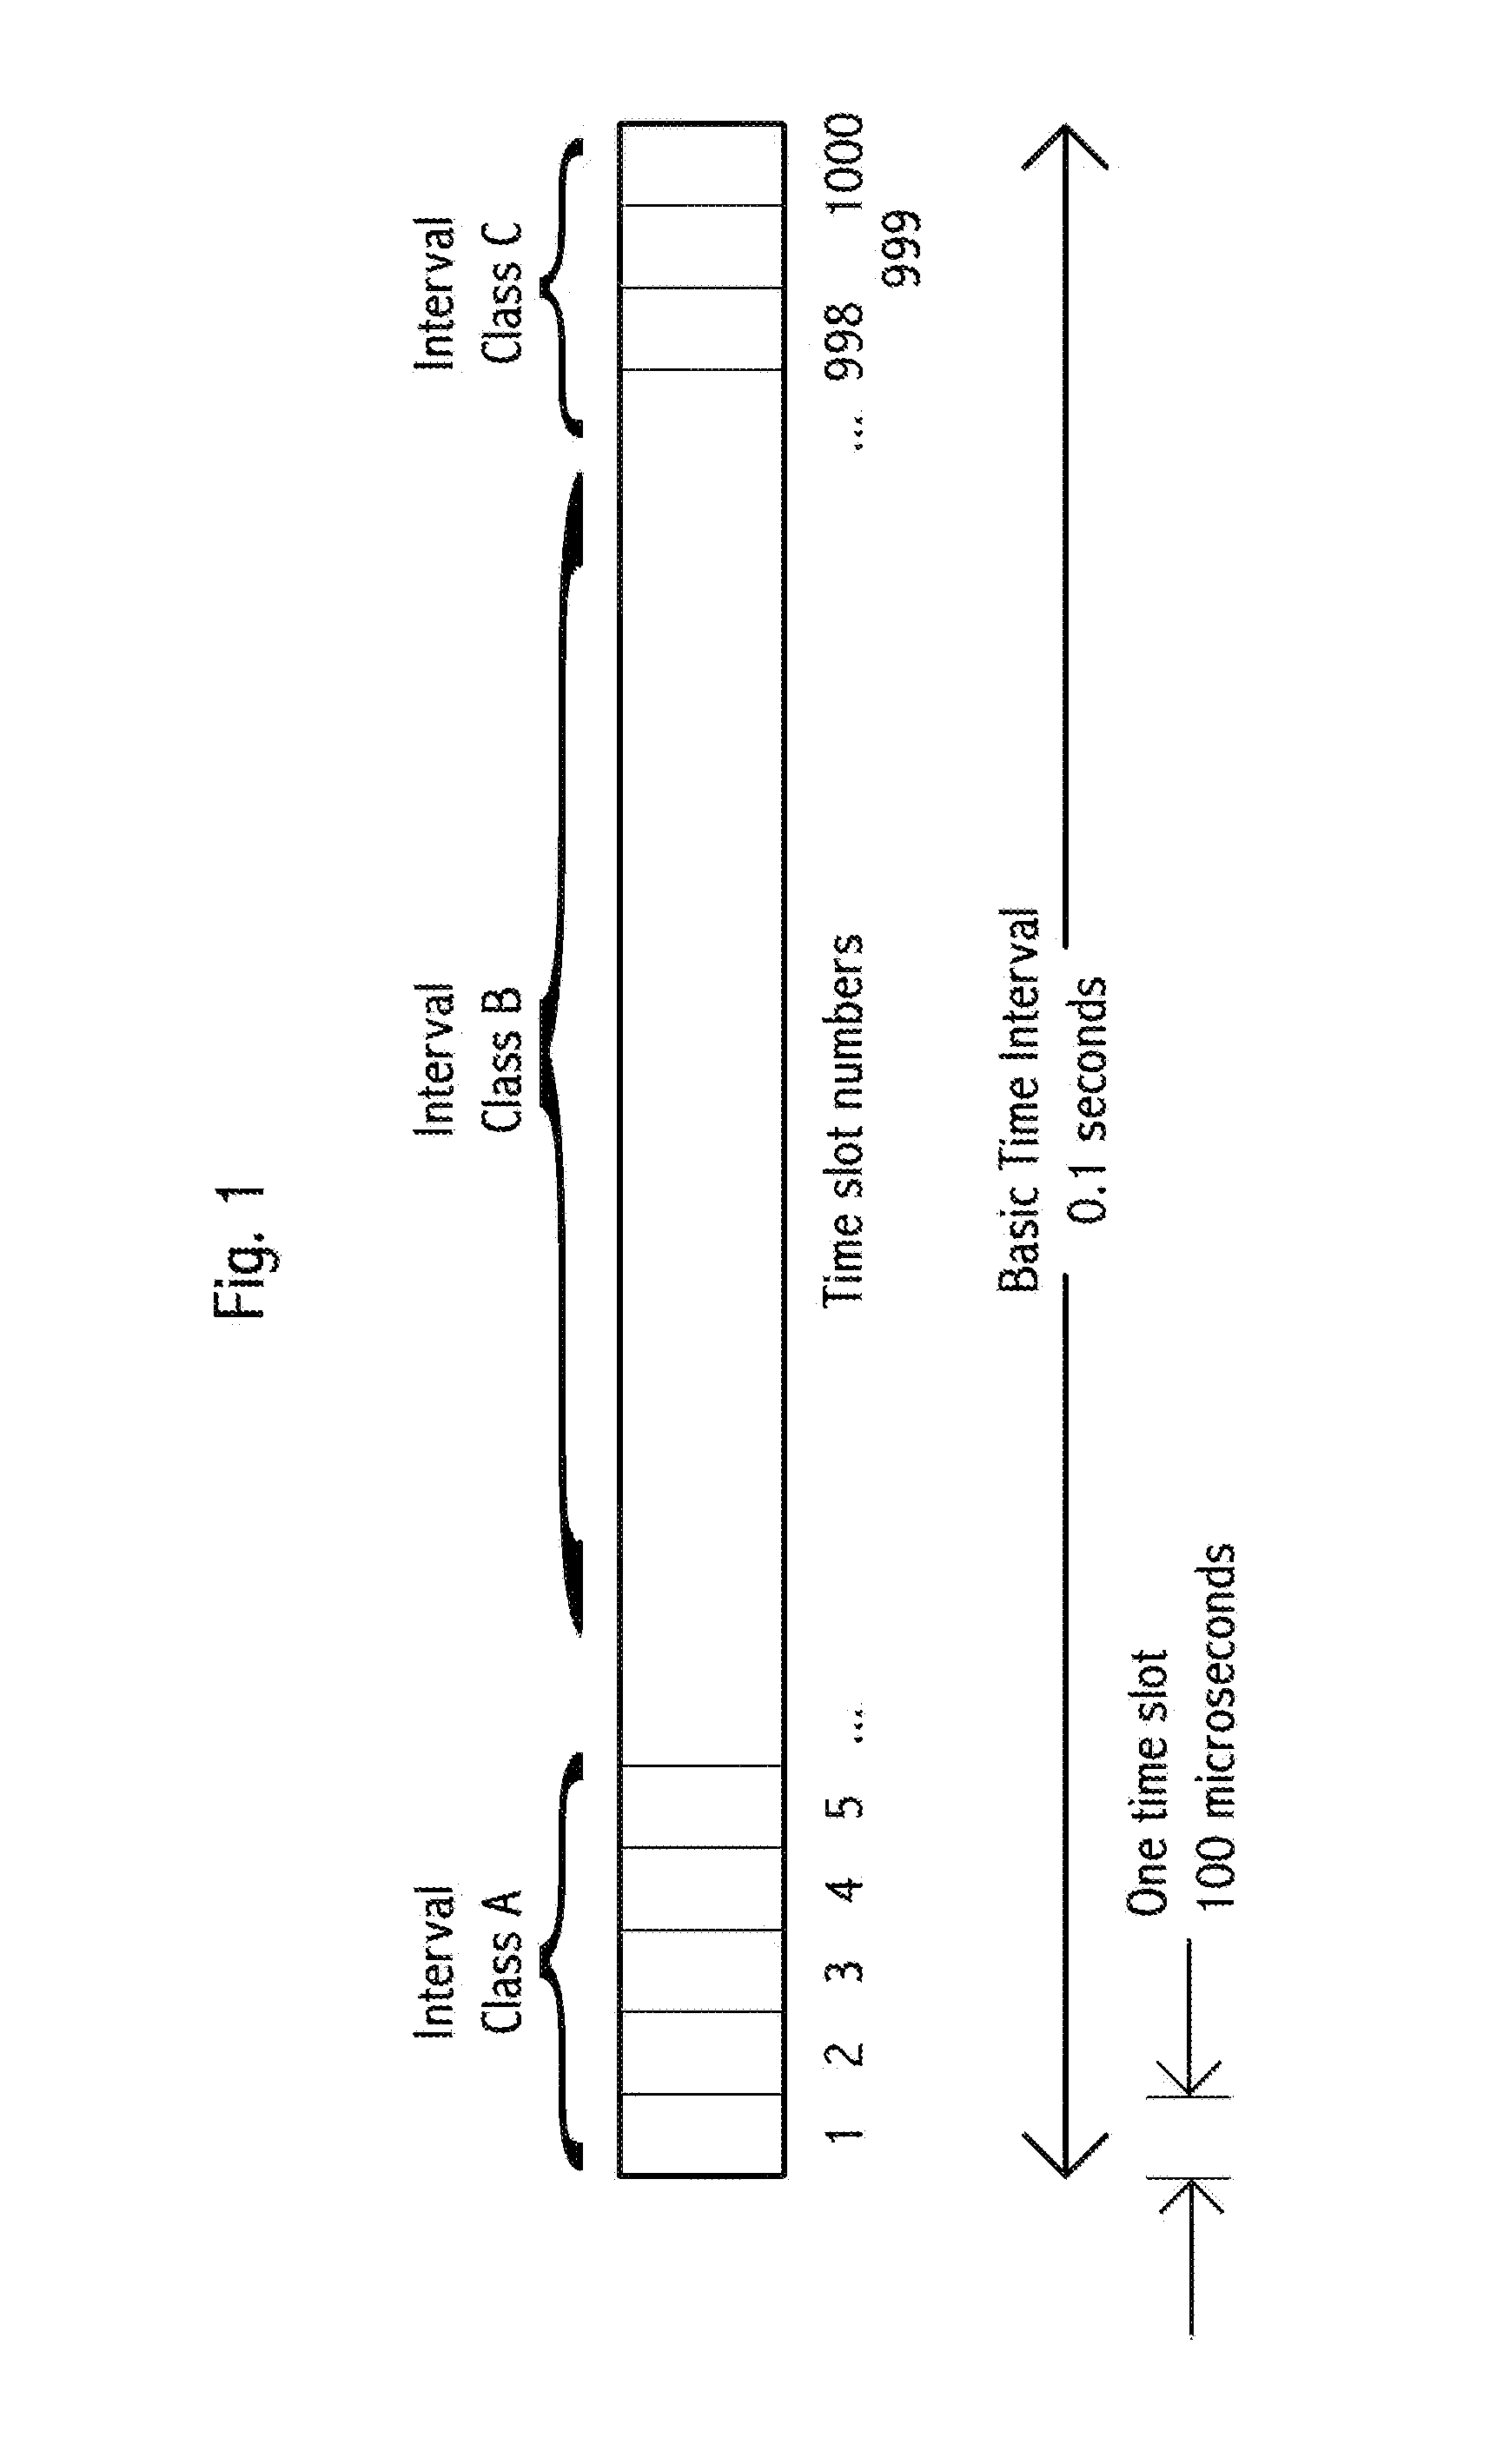 Time-slot-based system and method of inter-vehicle communication